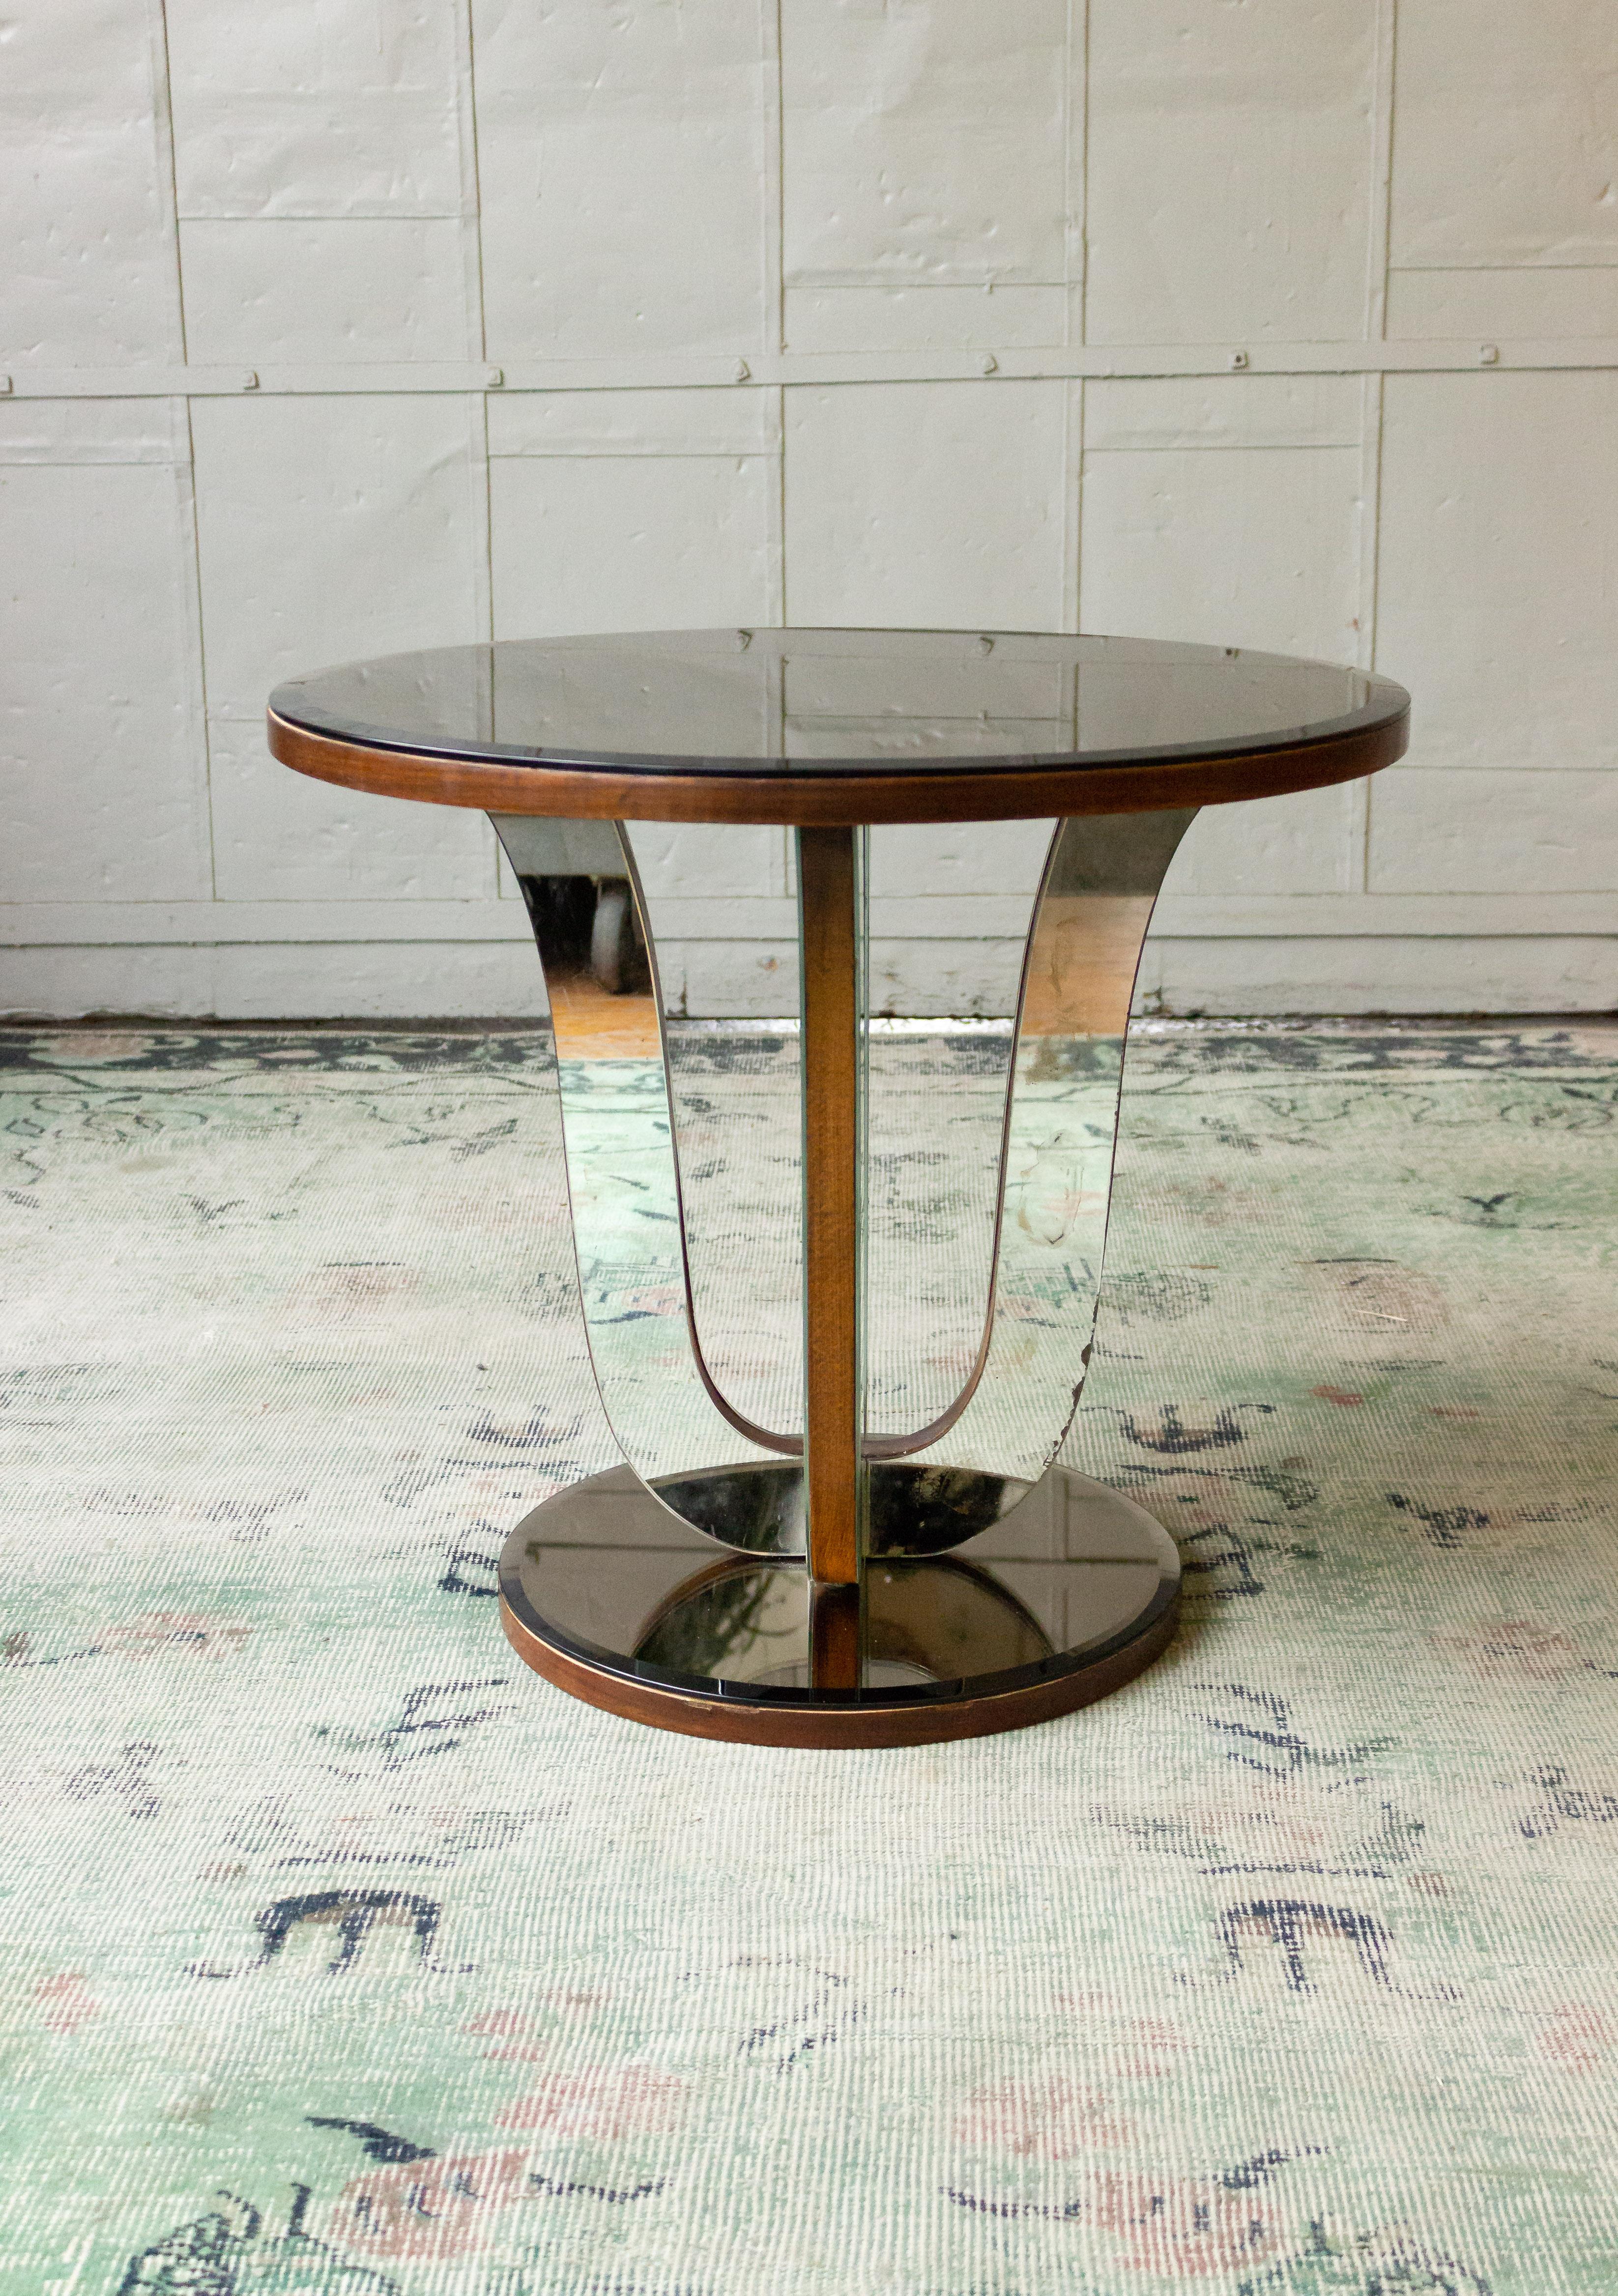 French Art Deco walnut end table. Original mirror remains on the legs while both the top and base have been replaced with a grey beveled mirror. 

